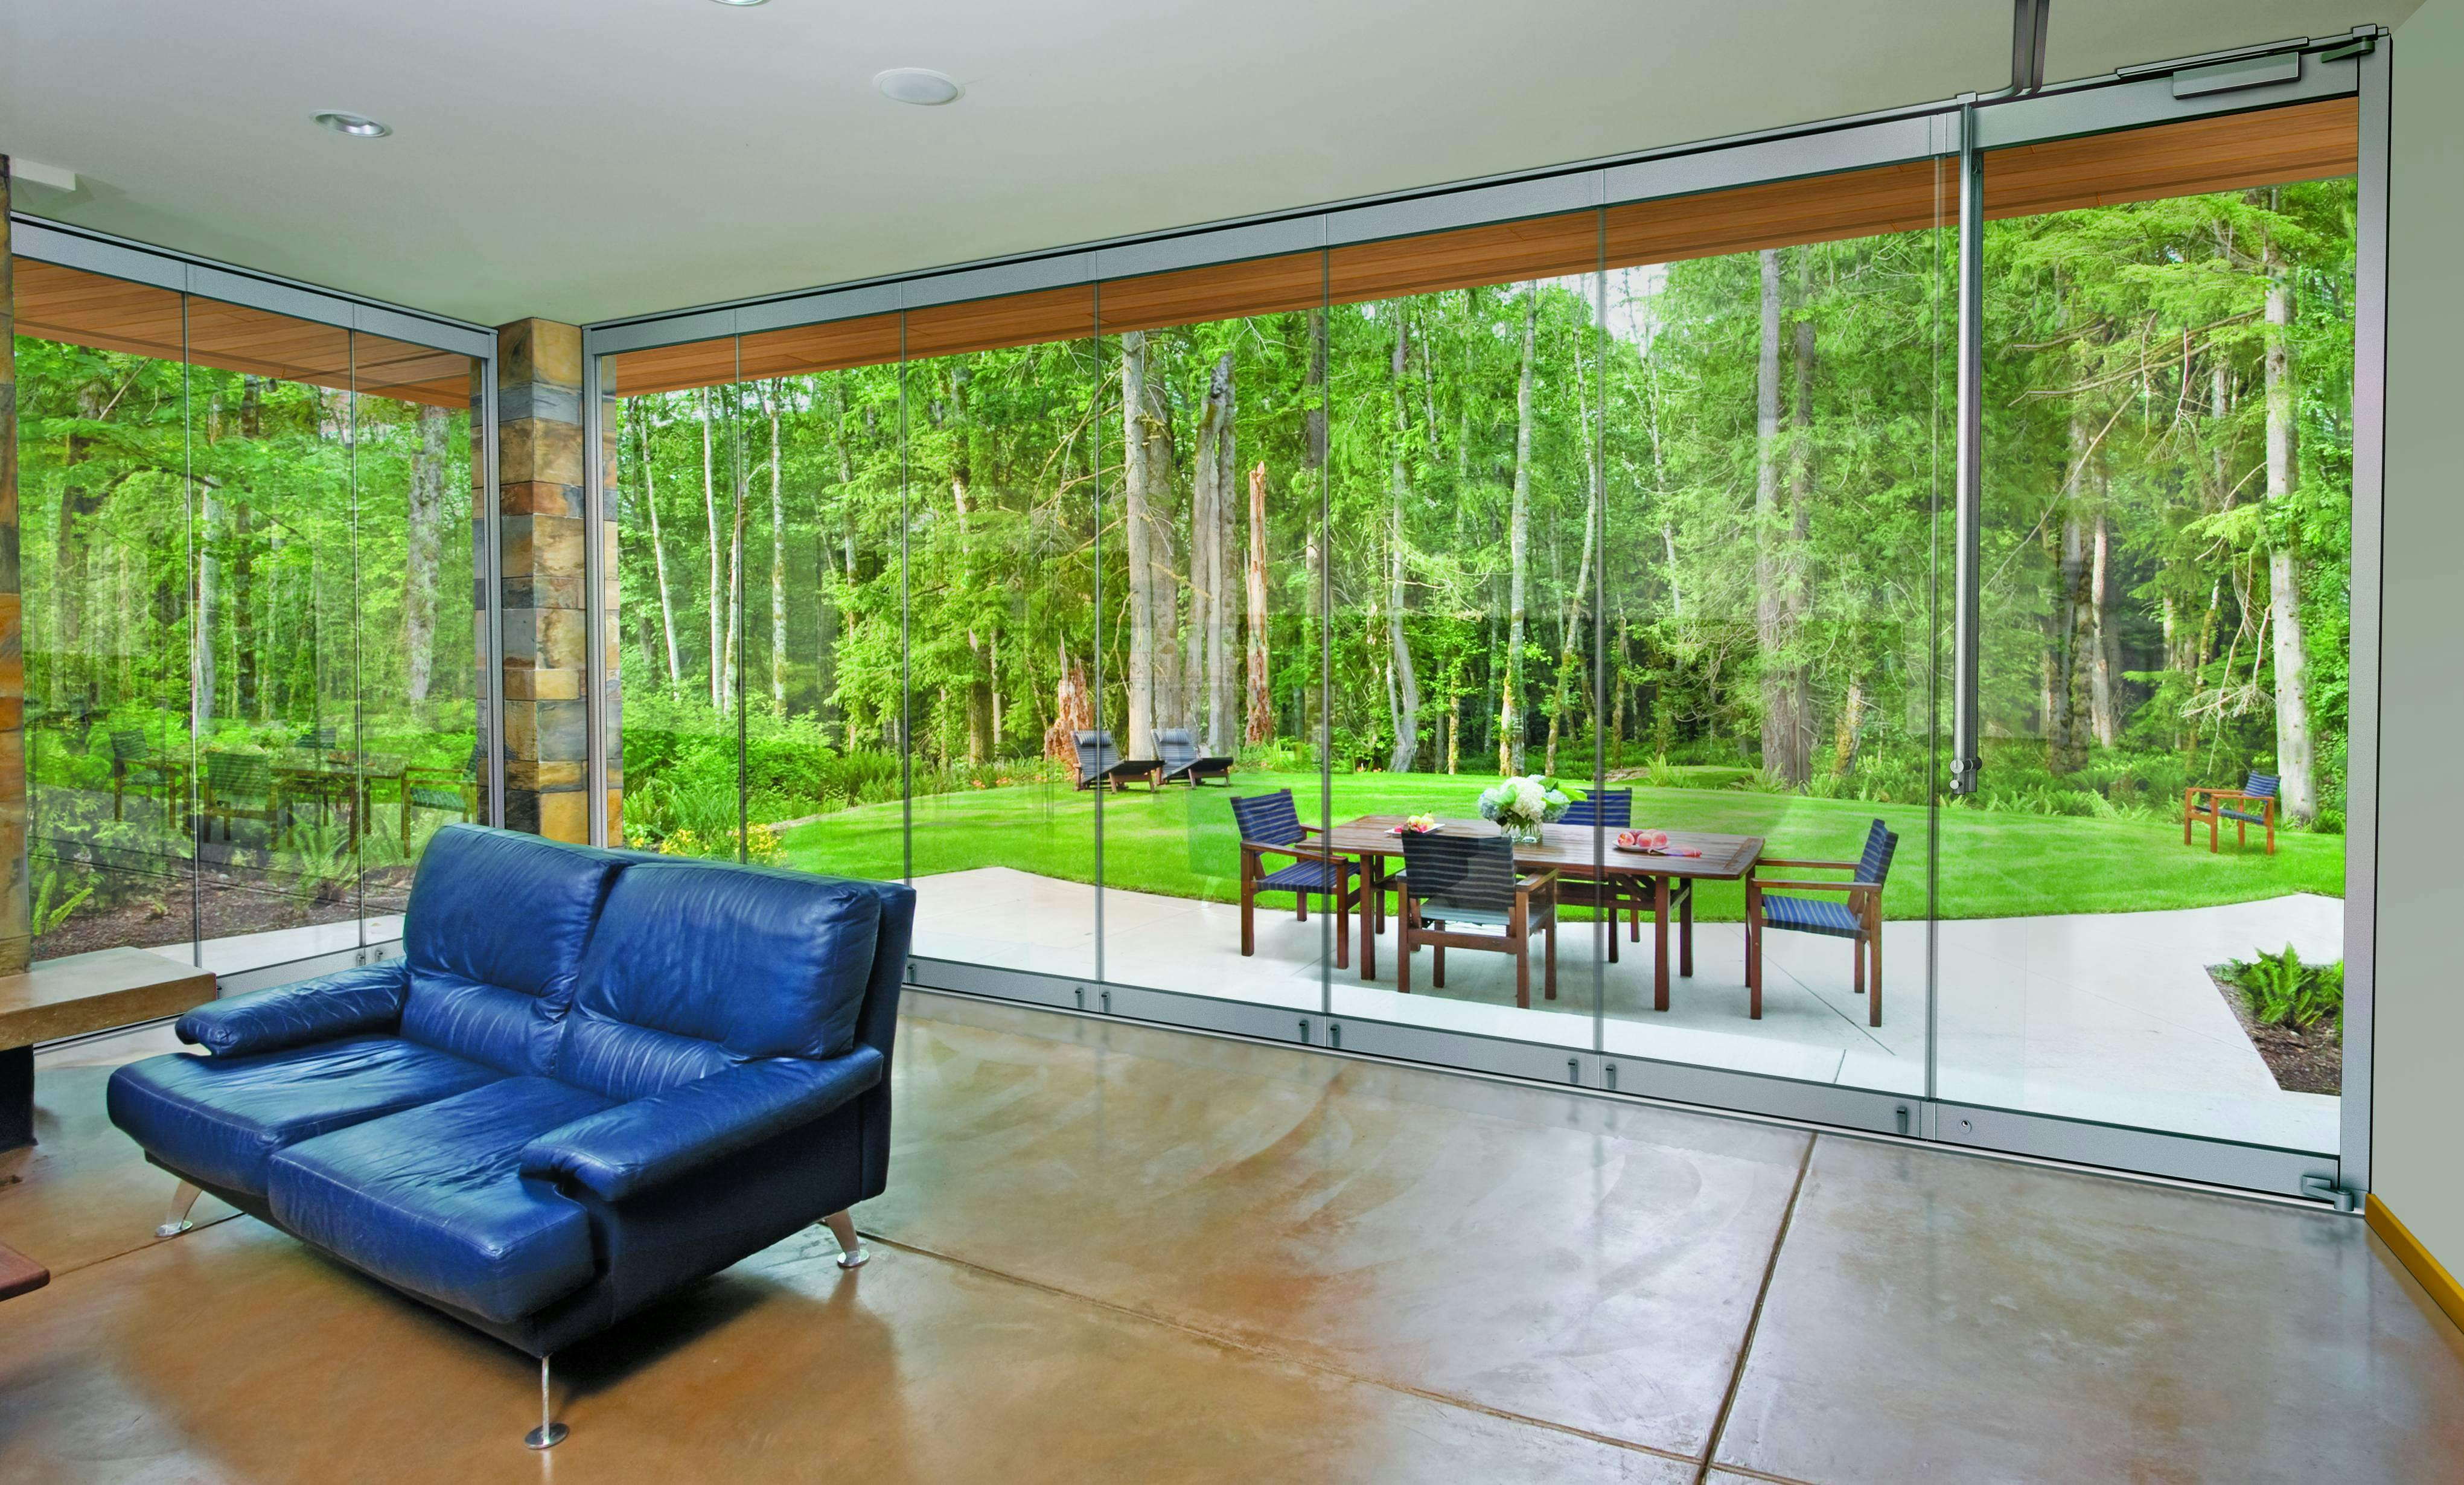 frameless-glass-walls-with-nature-views and biophilic design principles